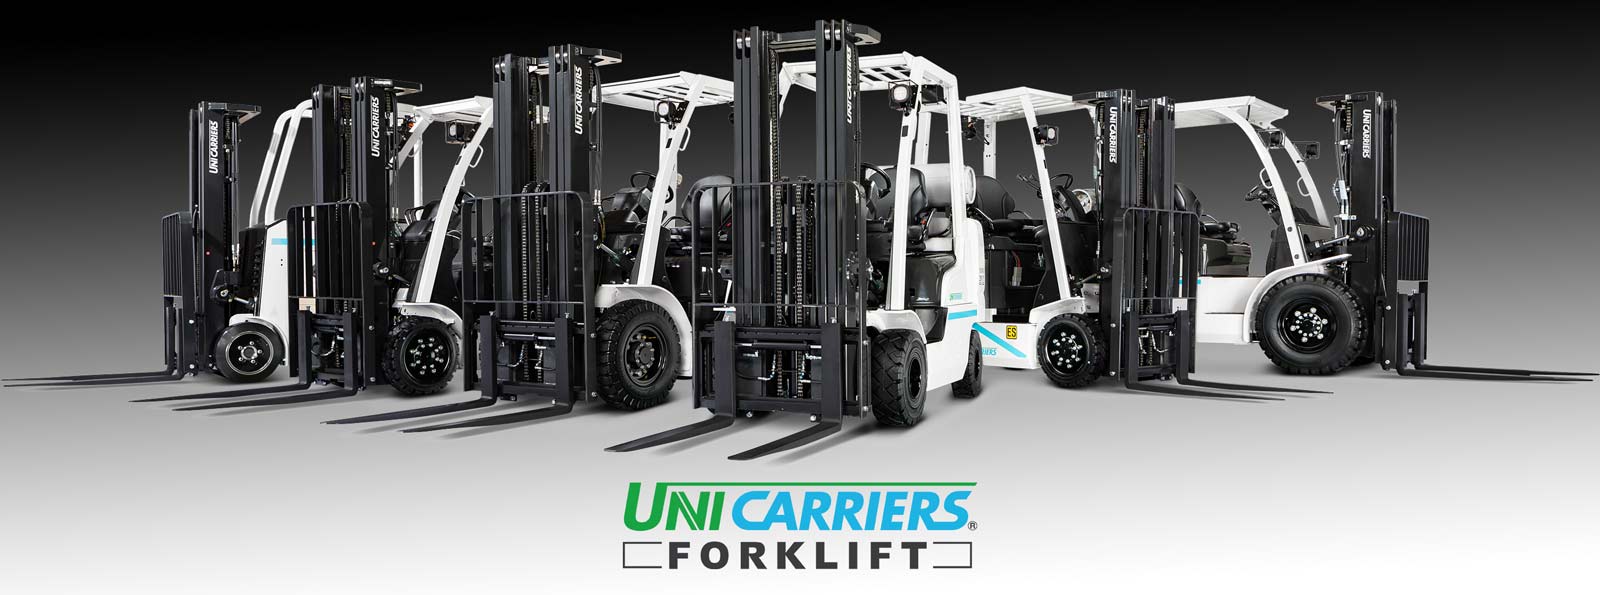 Unicarriers Forklift Sales In Sw Ontario Velkow Lift Truck Service